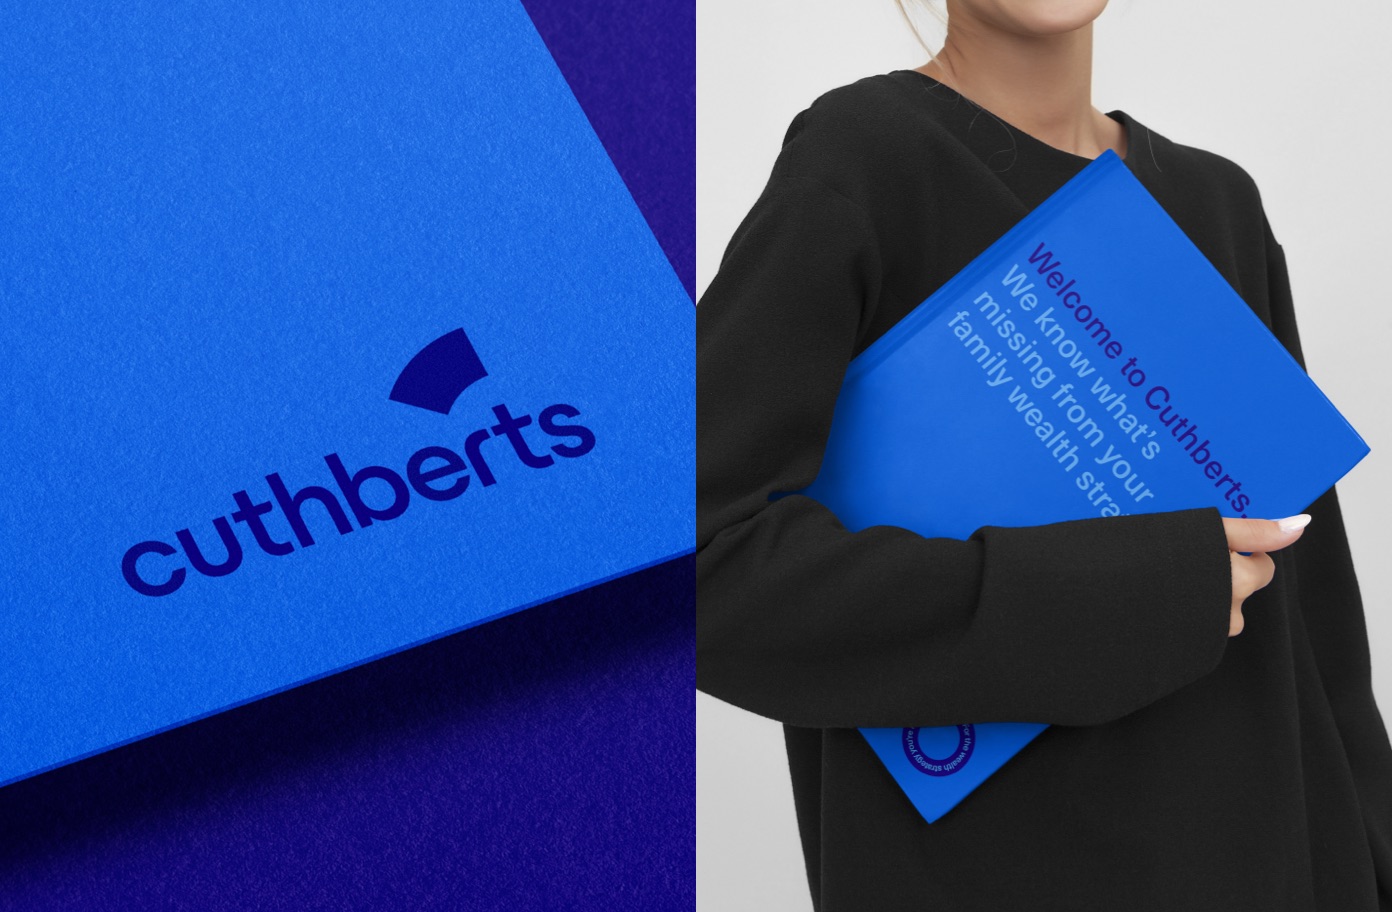 Brand logo and book – Cuthberts Business Advisory